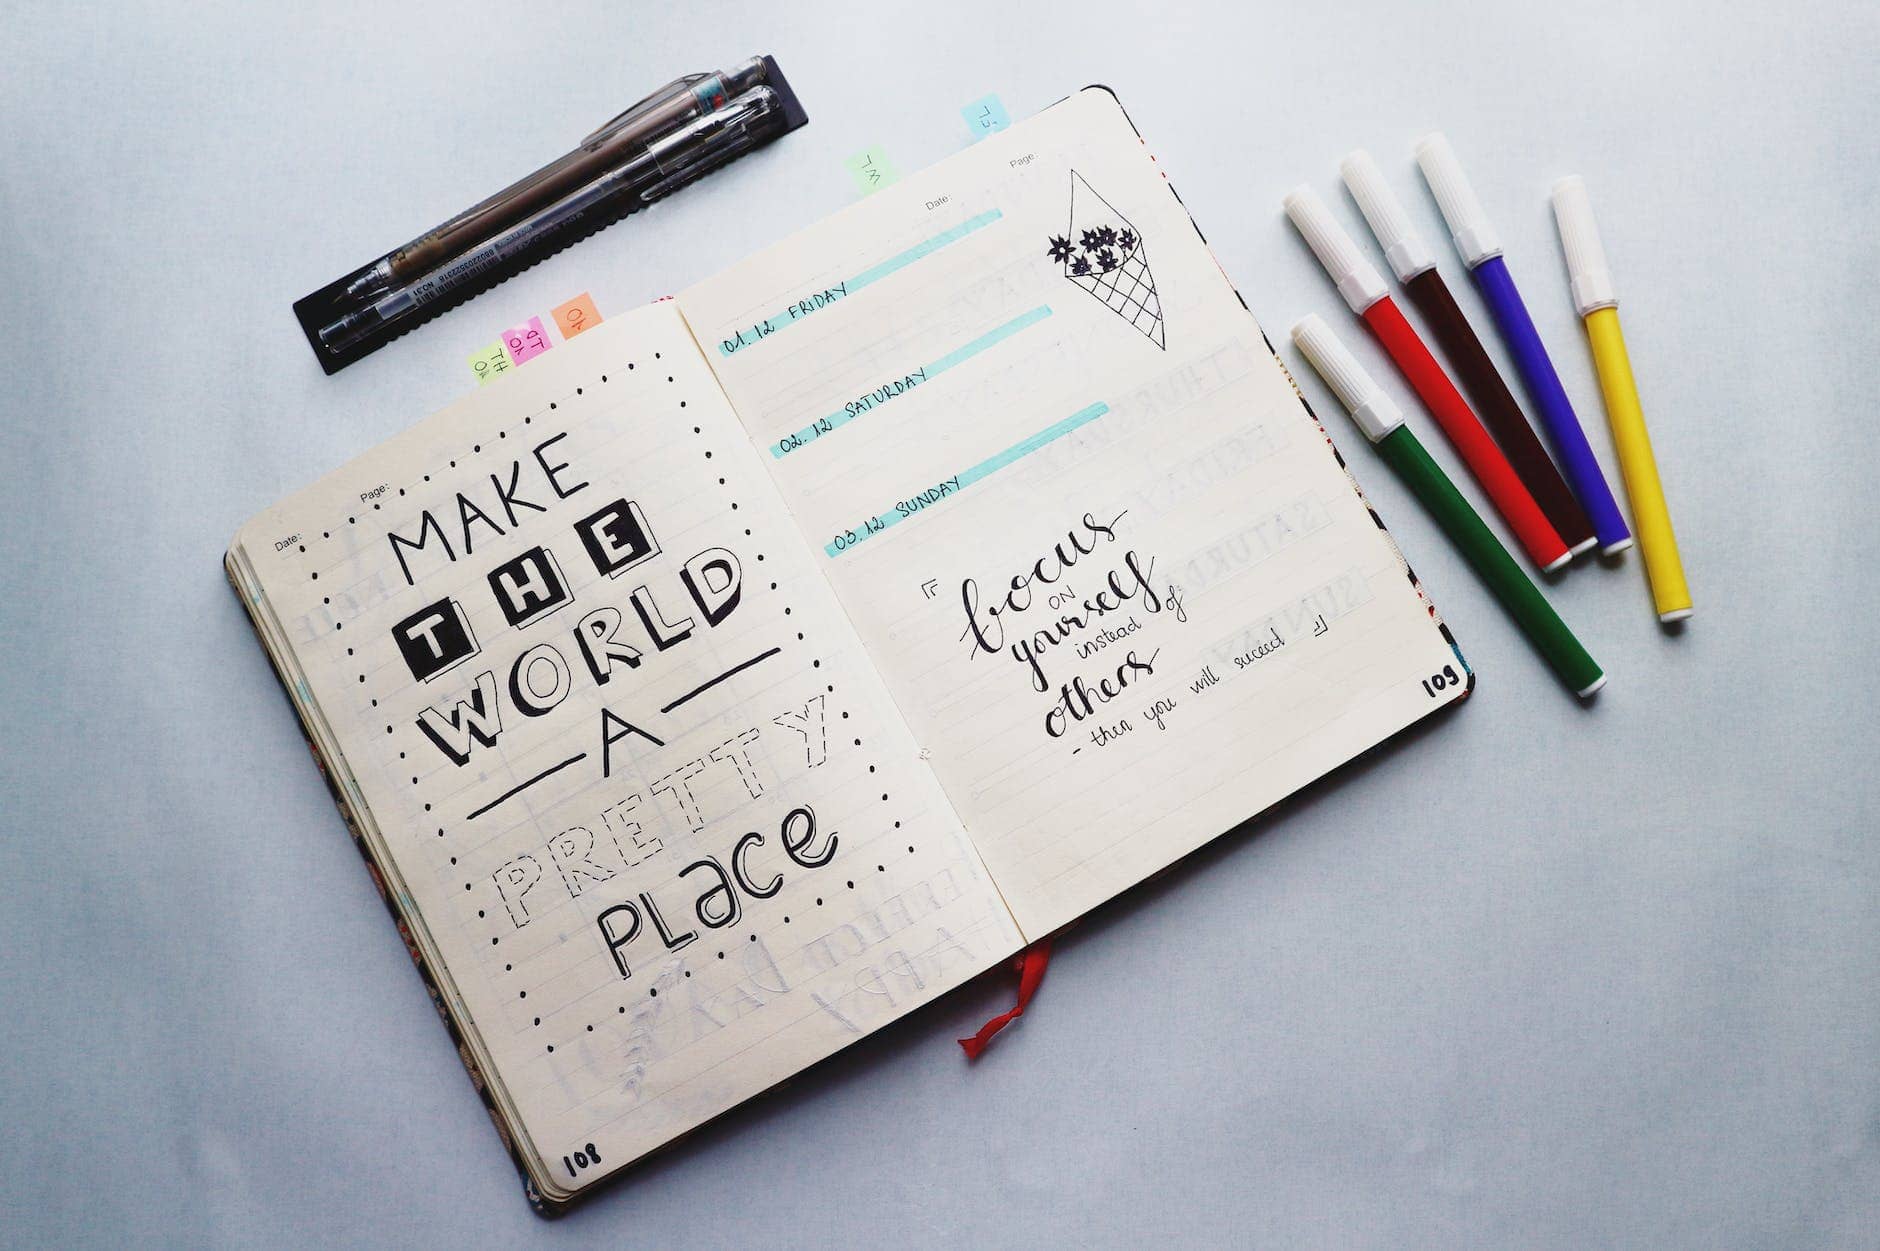 inspirational quotes written on a planner - bullet journaling for mental health